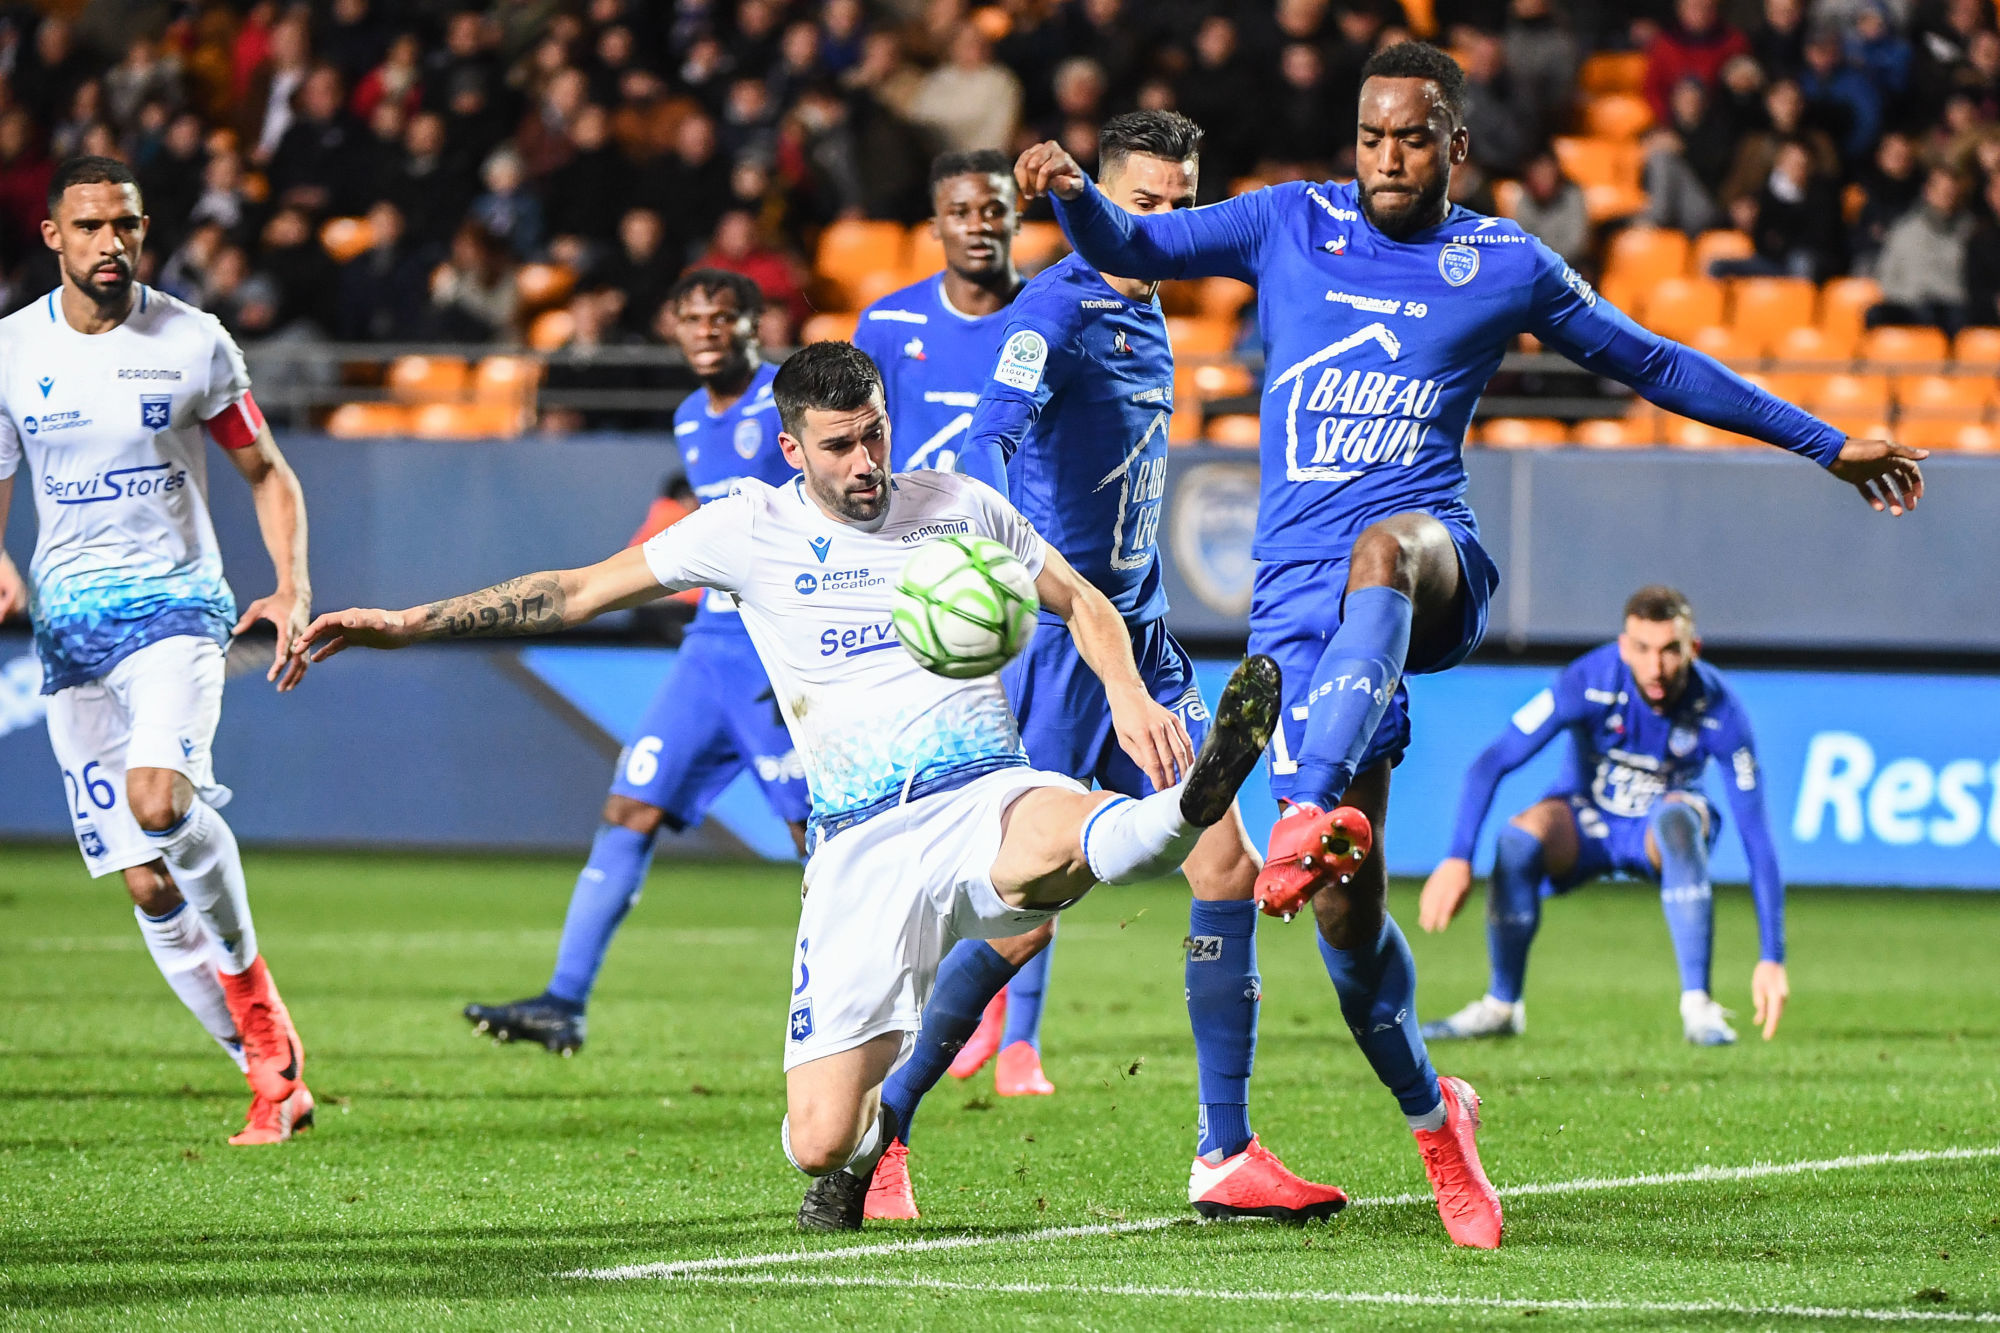 Quentin BERNARD of Auxerre an Yoann SALMIER of Troyes during the Ligue 2 match between Troyes and Auxerre at Stade de l'Aube on February 24, 2020 in Troyes, France. (Photo by Anthony Dibon/Icon Sport) - Stade de l'Aube - Troyes (France)